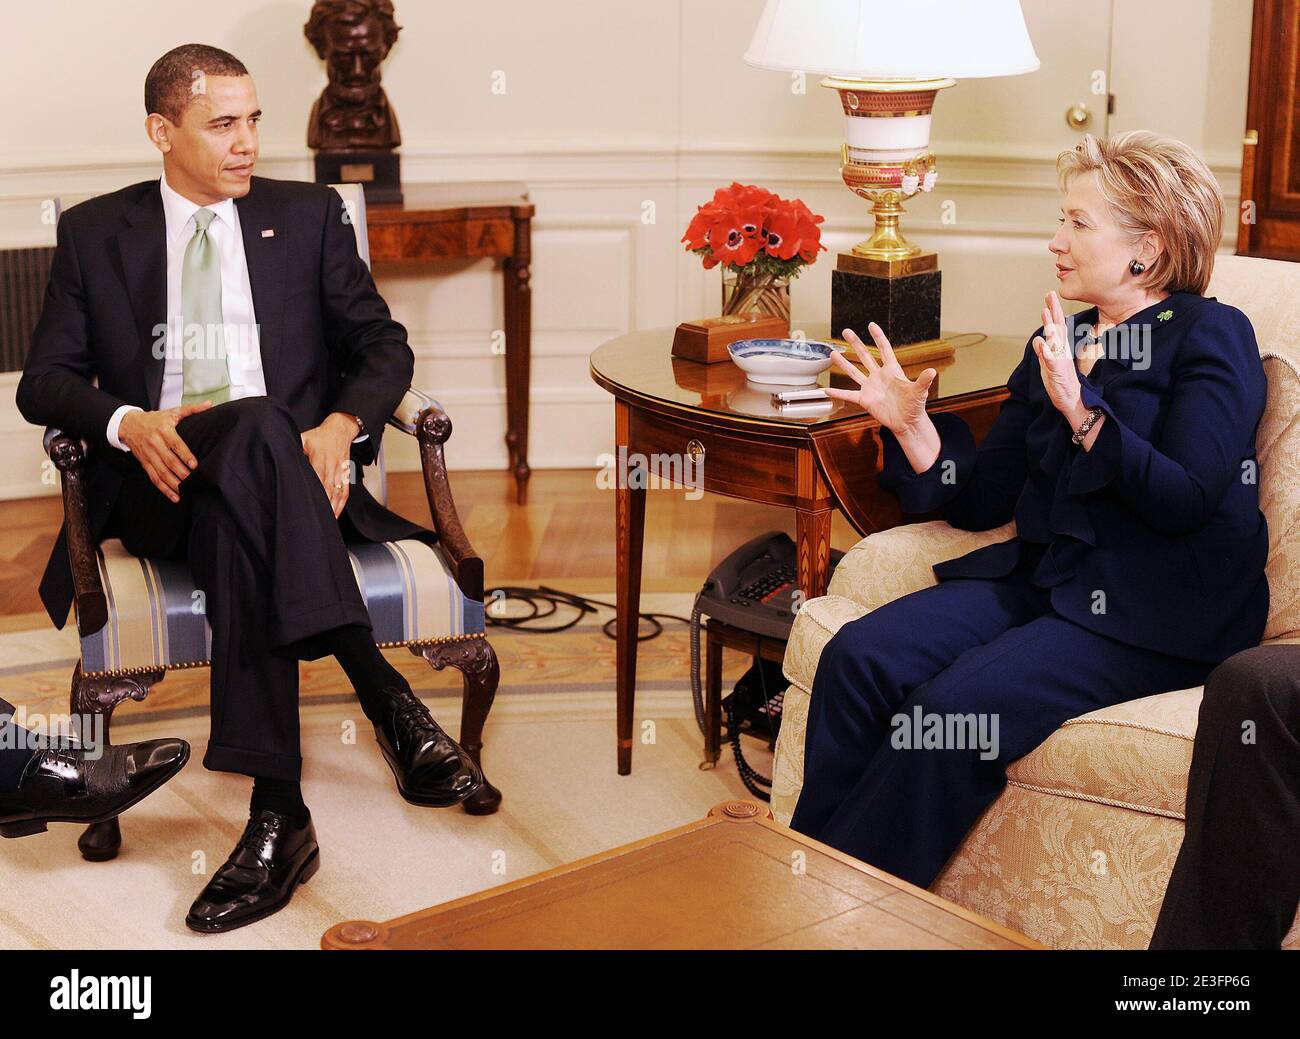 US President Barack Obama and Secretary of State Hillary Clinton meet with Irish Taoiseach (Prime Minister) Brian Cowen in the Oval Ofice at the White House. in Washington DC, USA on March 17, 2009. Photo by Olivier Douliery/ABACAPRESS.COM Stock Photo